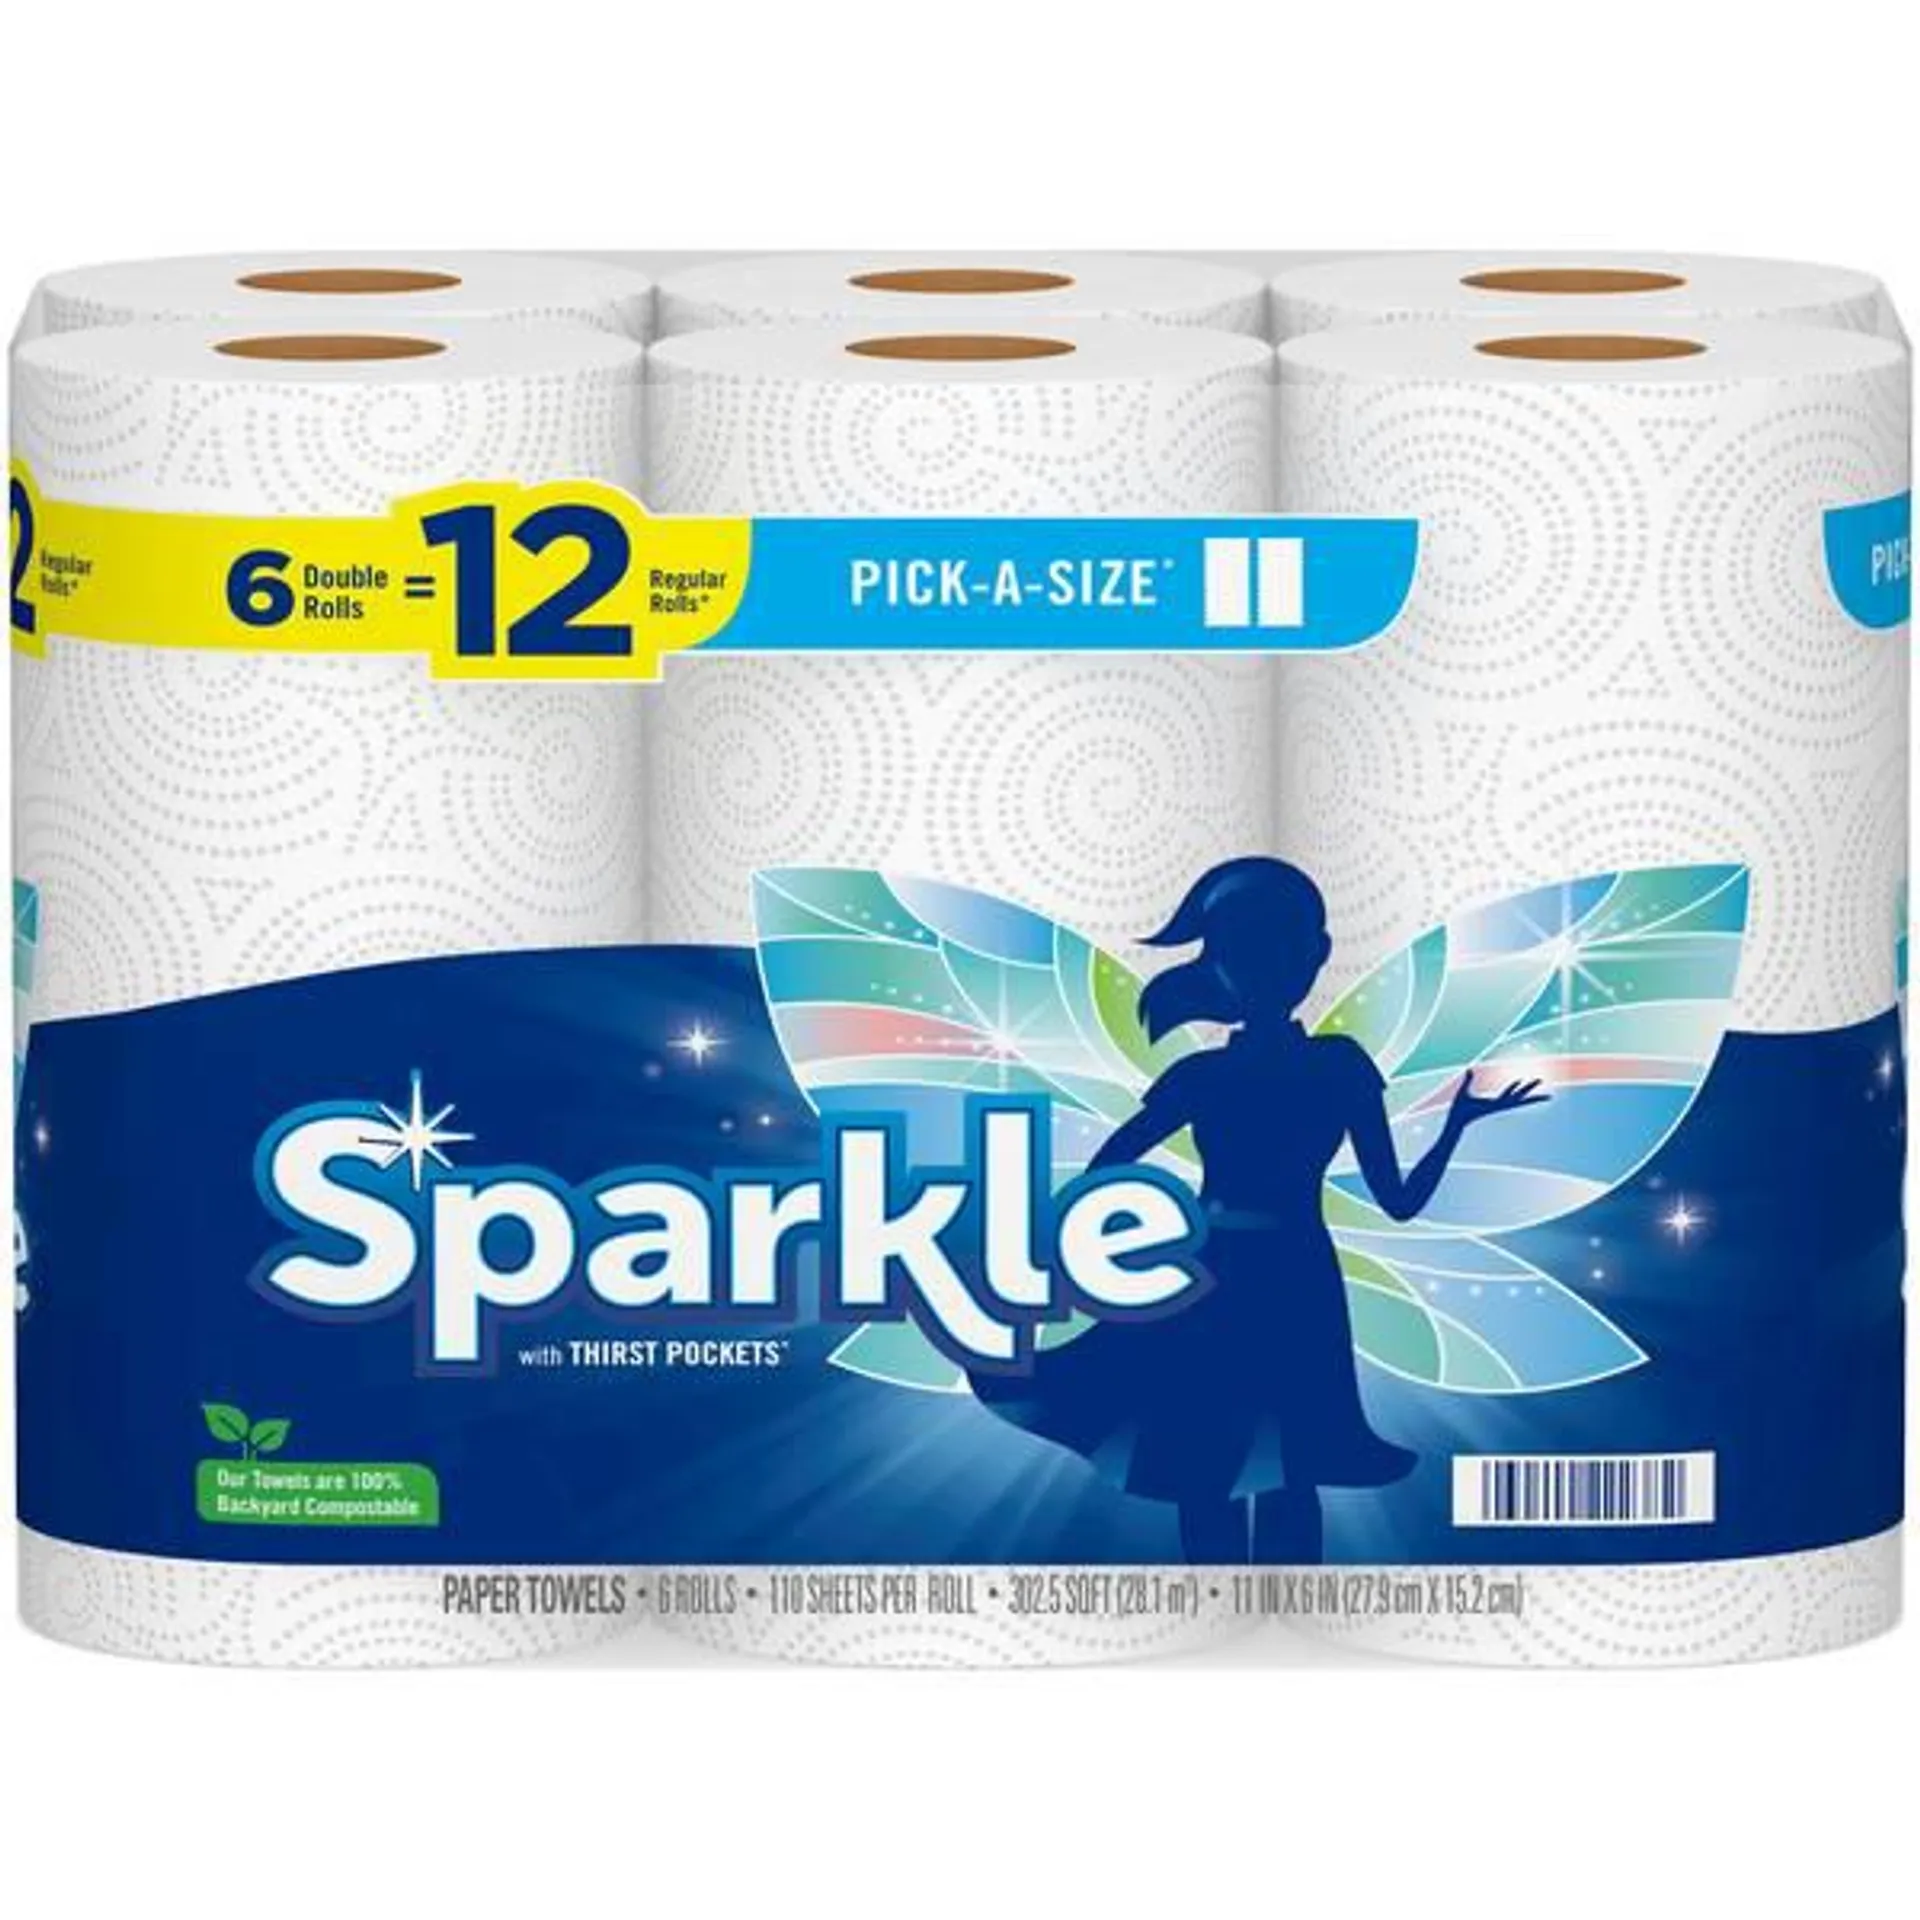 6-Count Pick-A-Size 2-ply Paper Towels